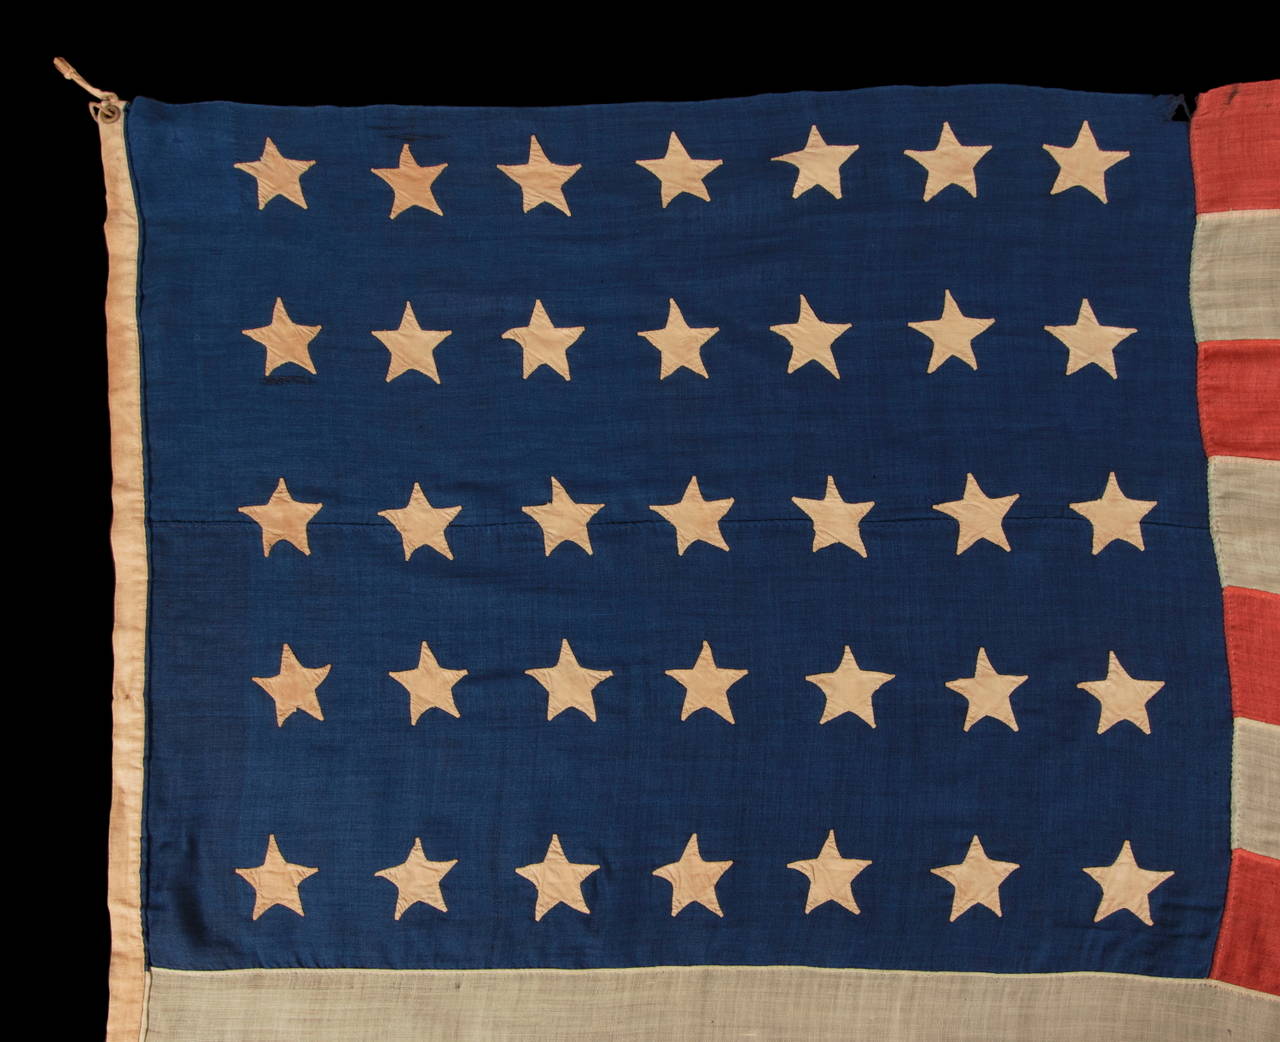 35 hand-sewn, single-appliquéd stars on an civil war period flag with hand-sewn stripes, 1863-1865, west virginia statehood:

 35 star American national flag of the Civil War period, in a large-scale typical of the 19th century. West Virginia